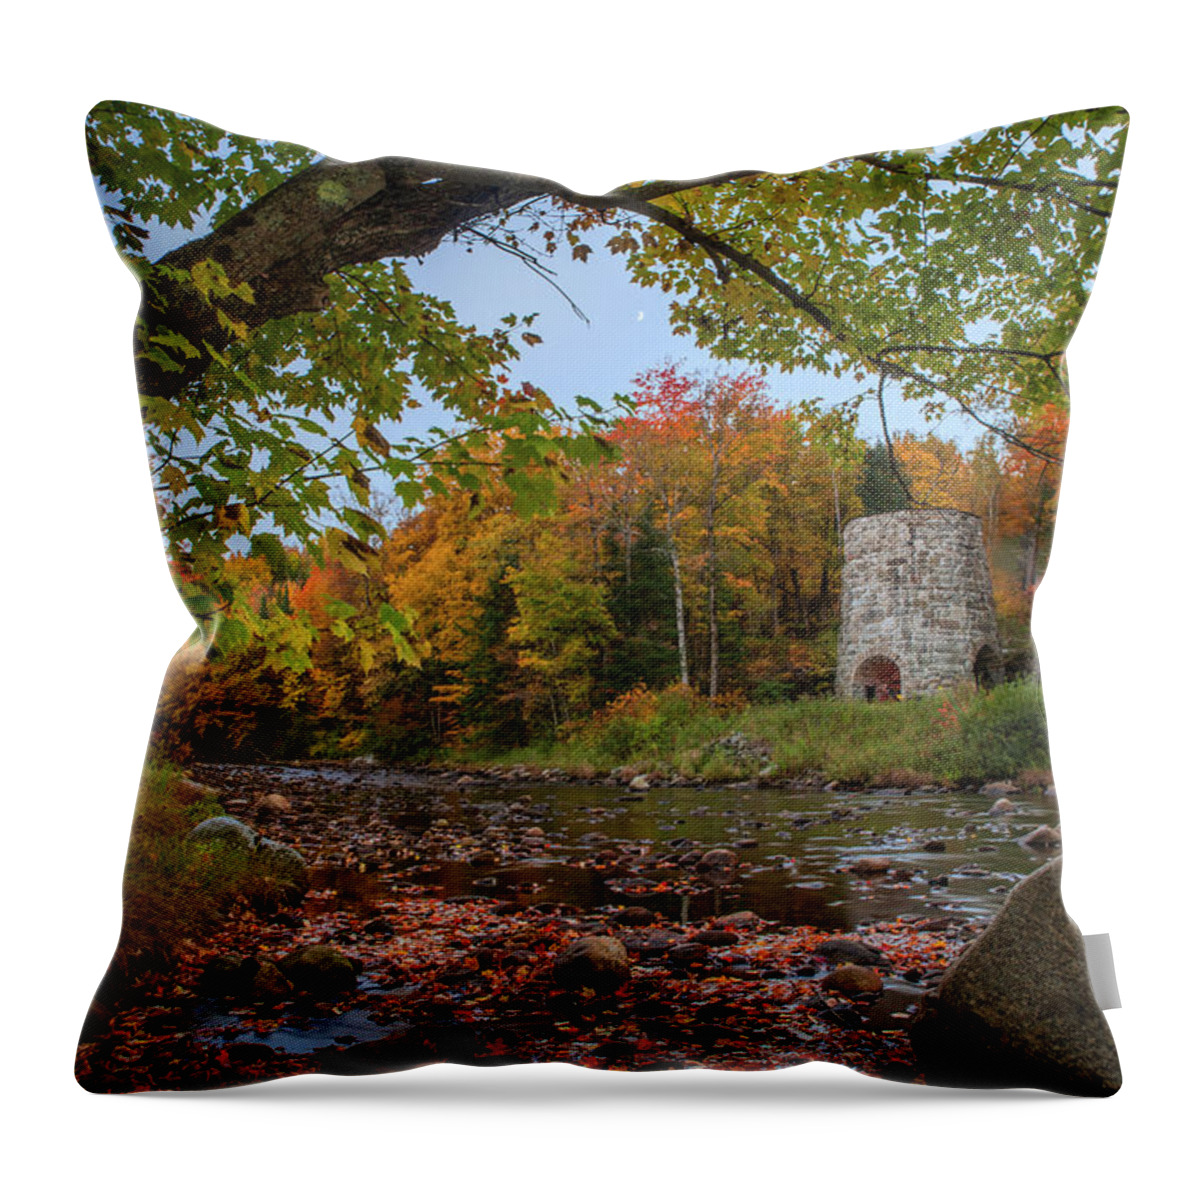 Old Throw Pillow featuring the photograph Old Stone Furnace Autumn by White Mountain Images